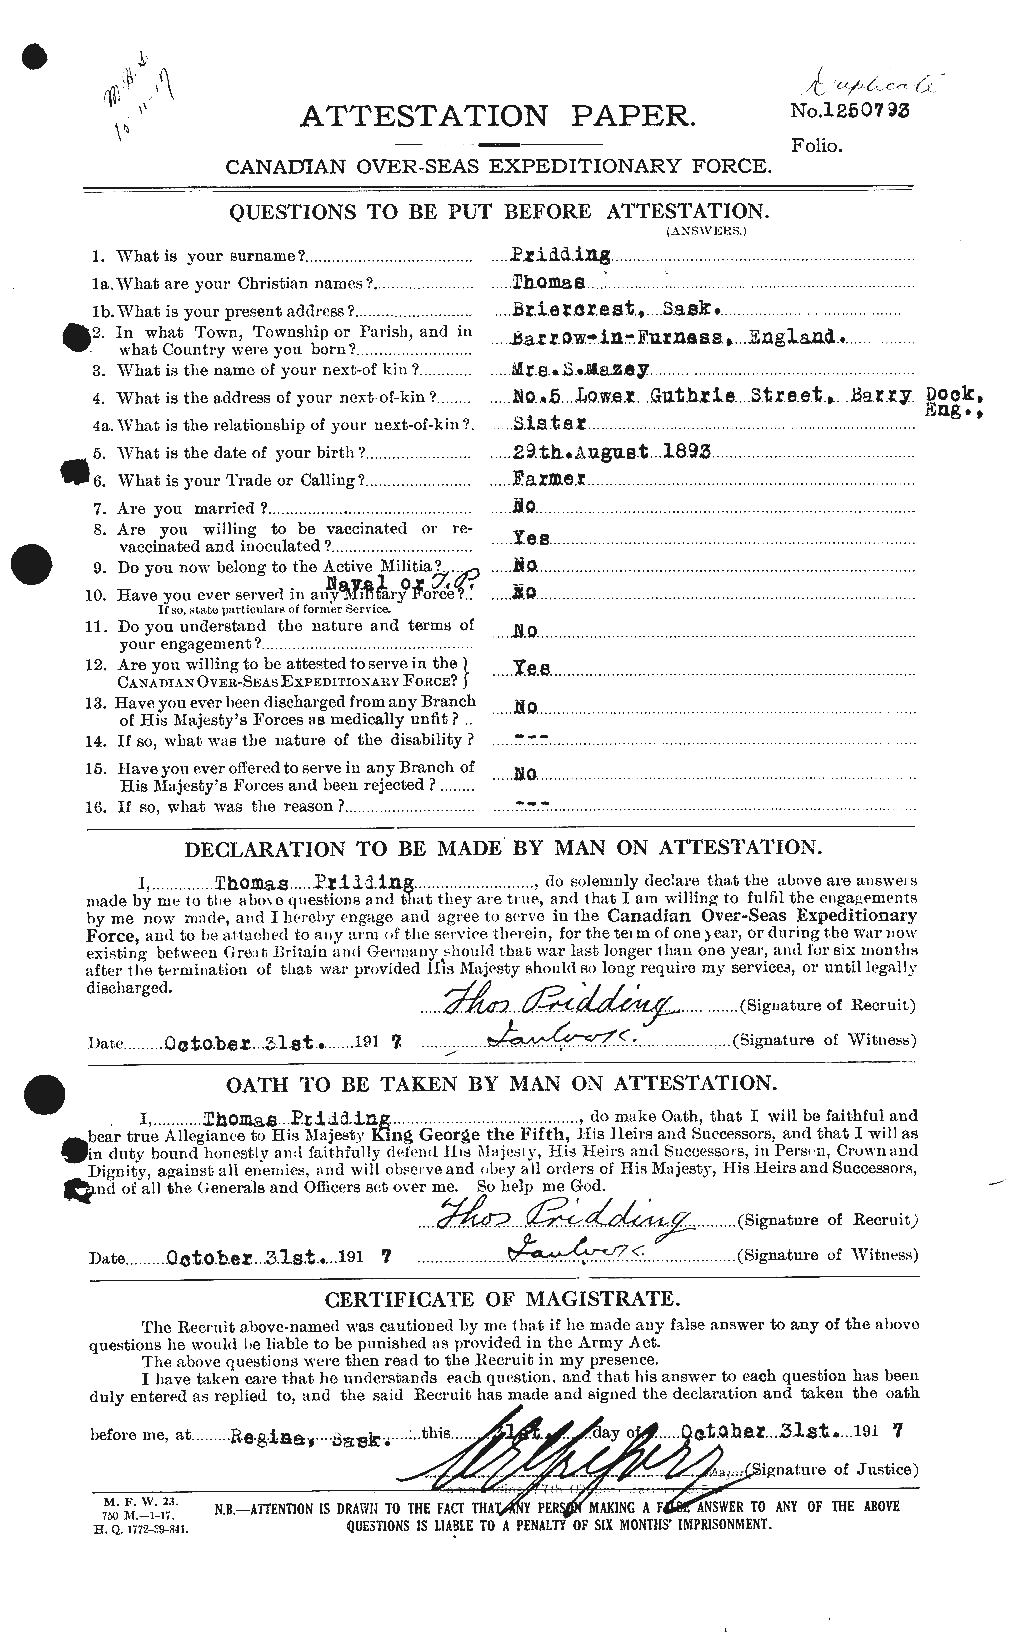 Personnel Records of the First World War - CEF 587482a